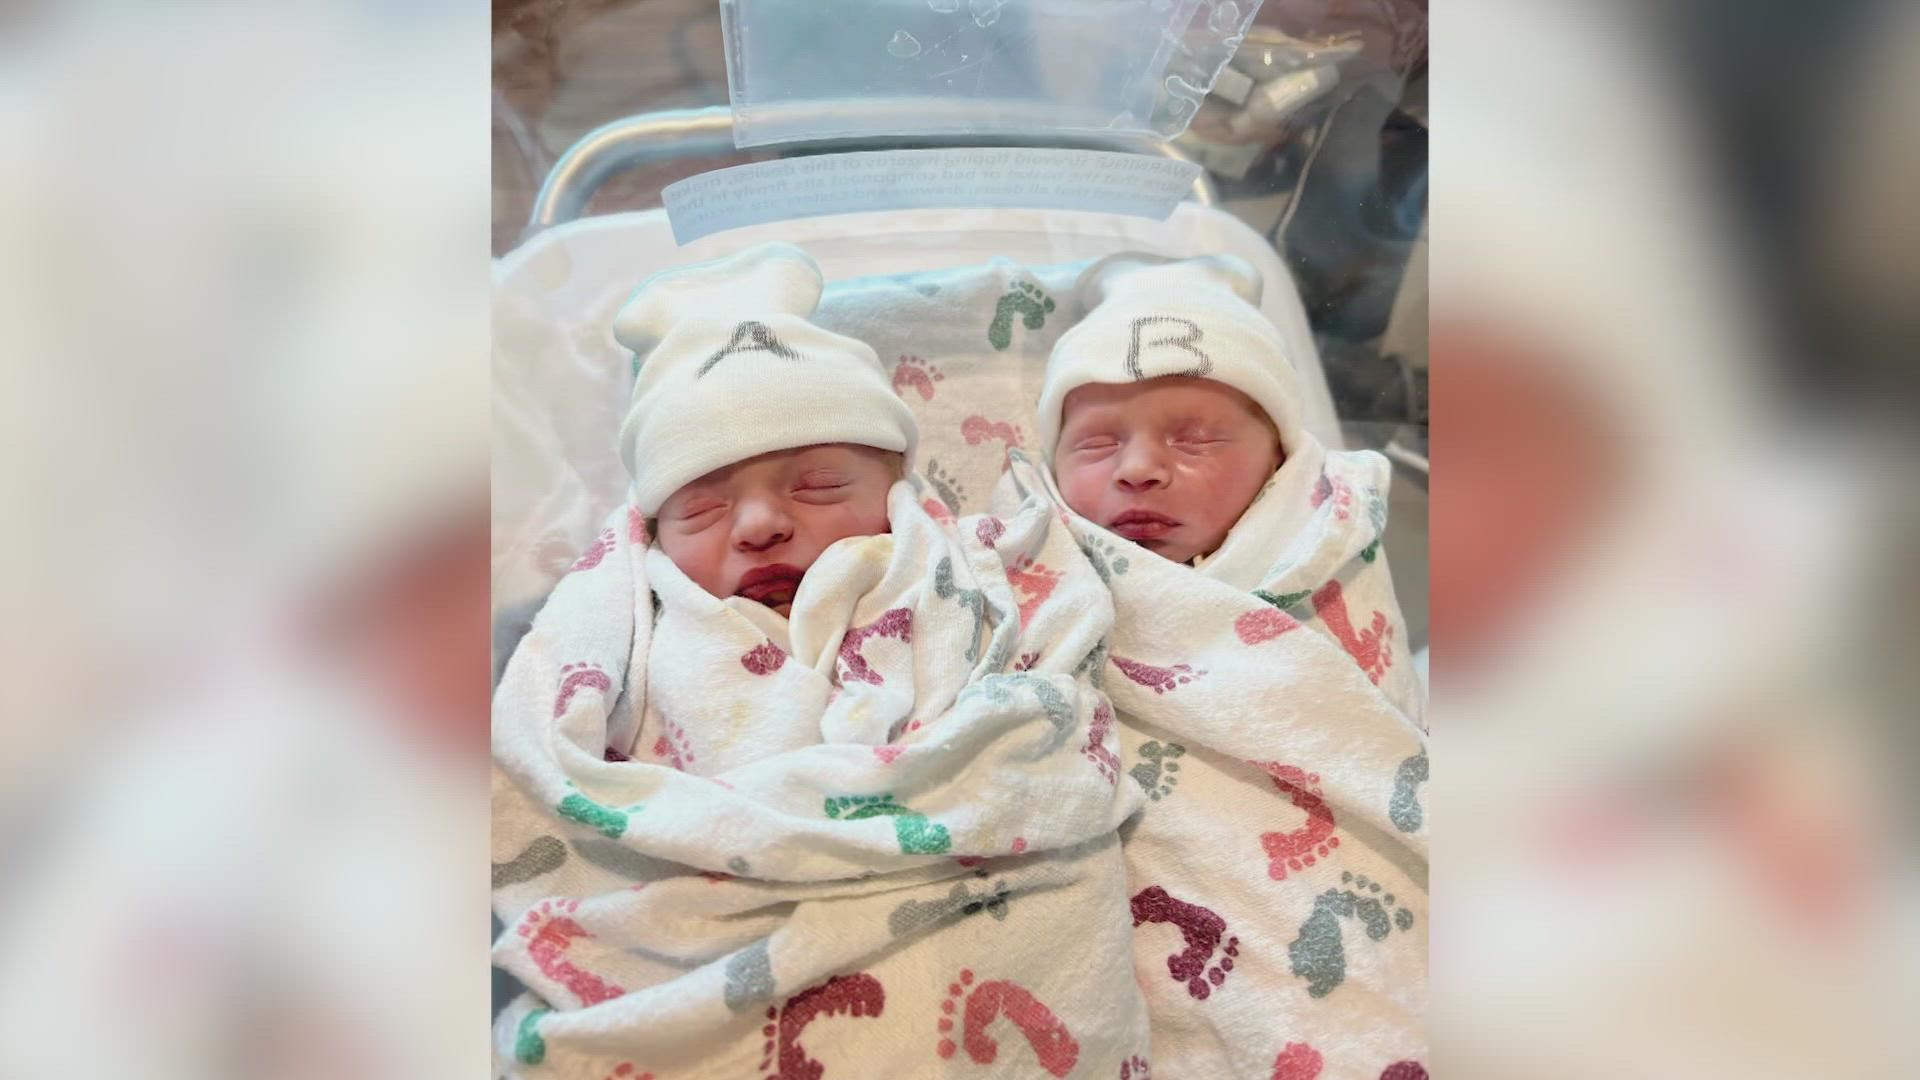 One was born at 11:55 p.m. on Dec. 31, then the other came to the world at 12:01 a.m. Jan. 1.